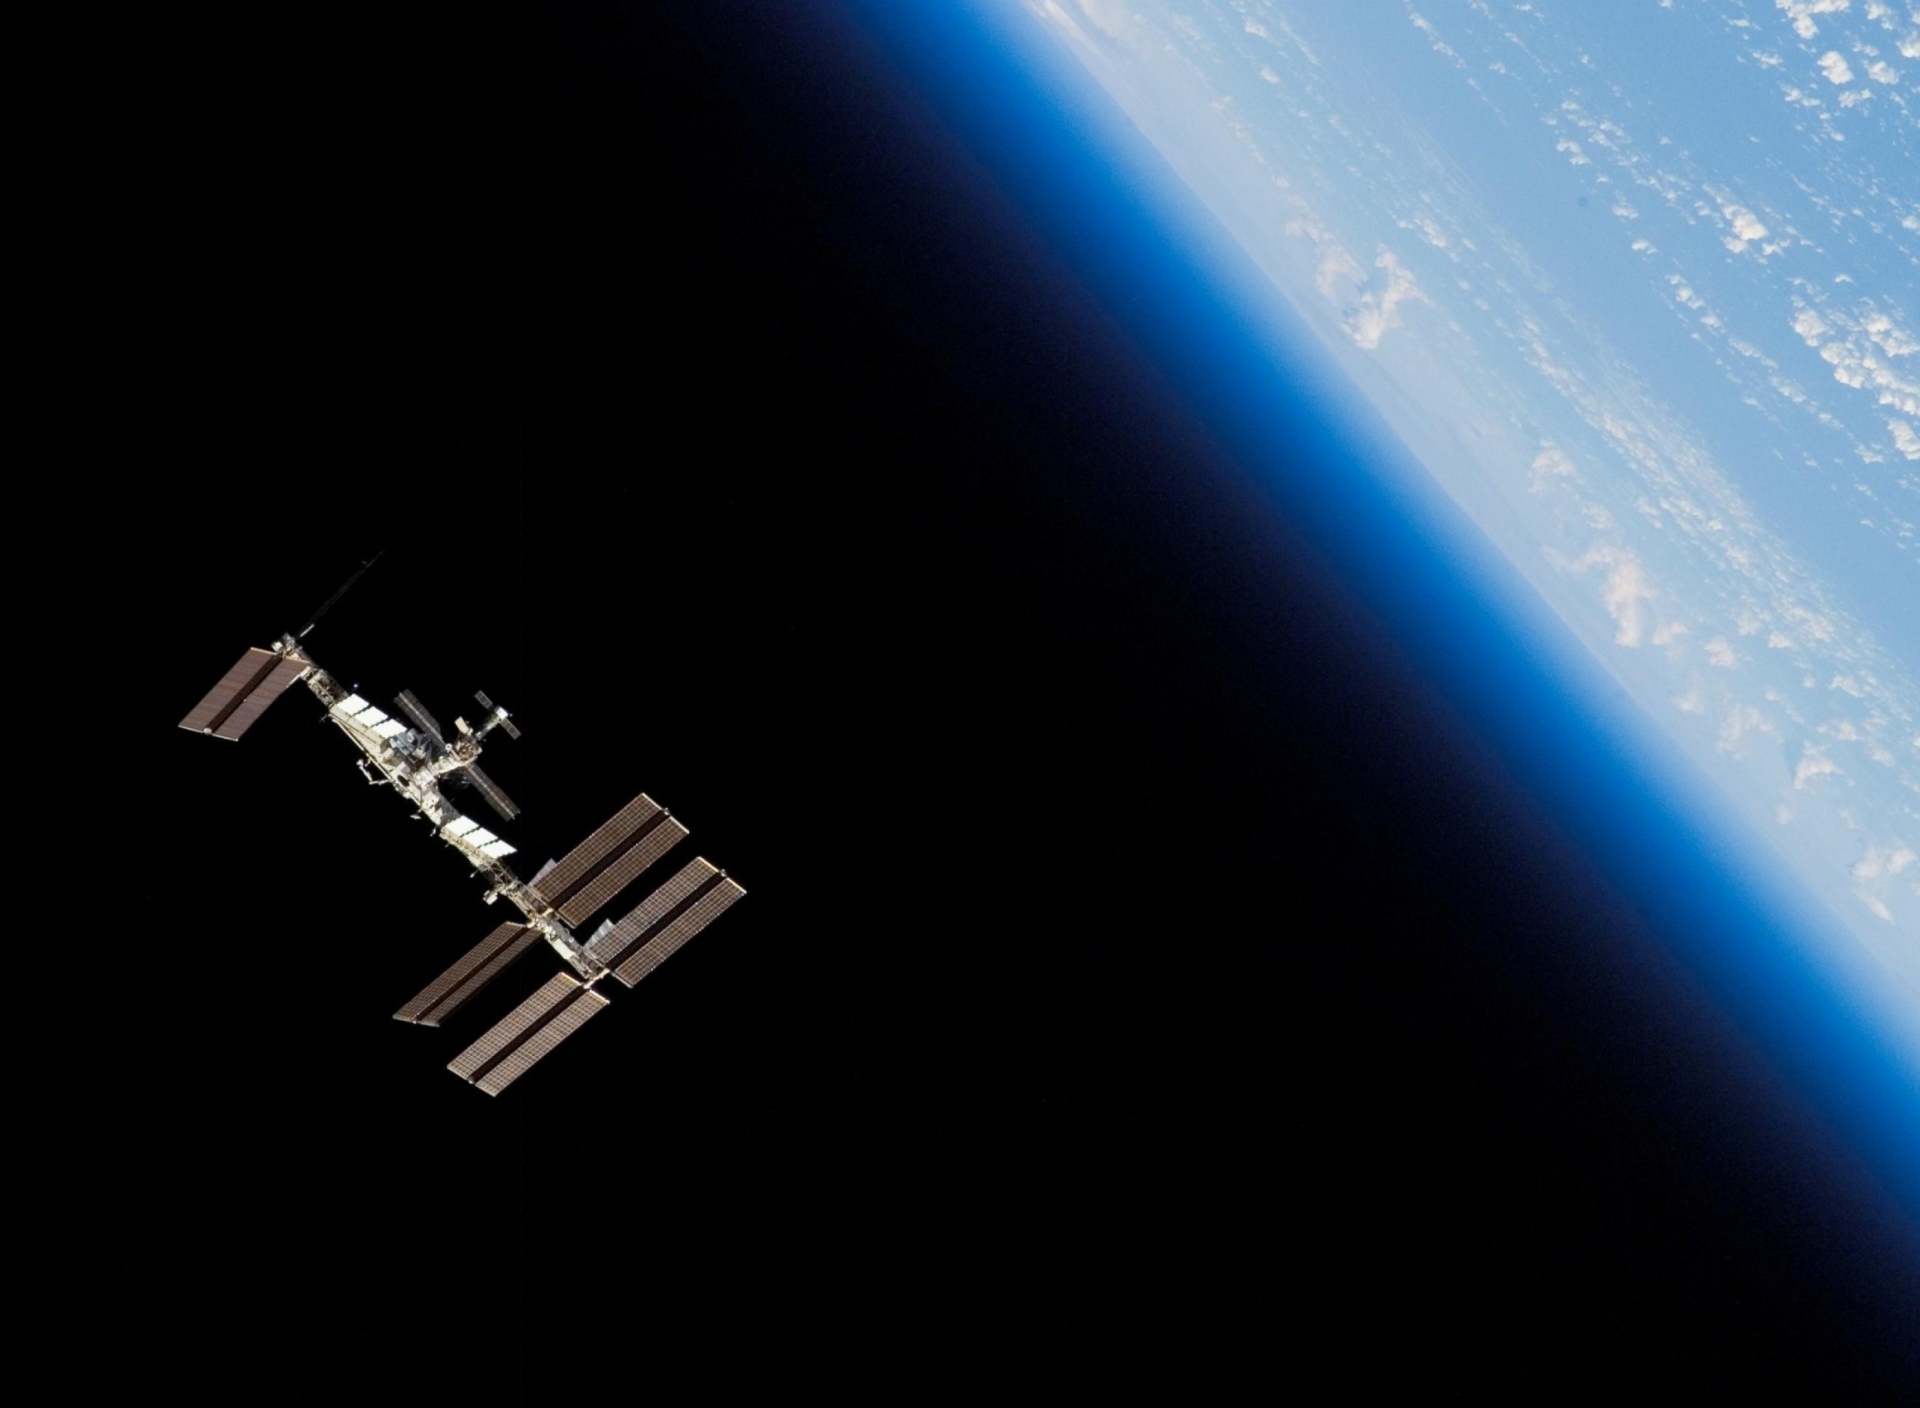 The ISS In Space screenshot #1 1920x1408